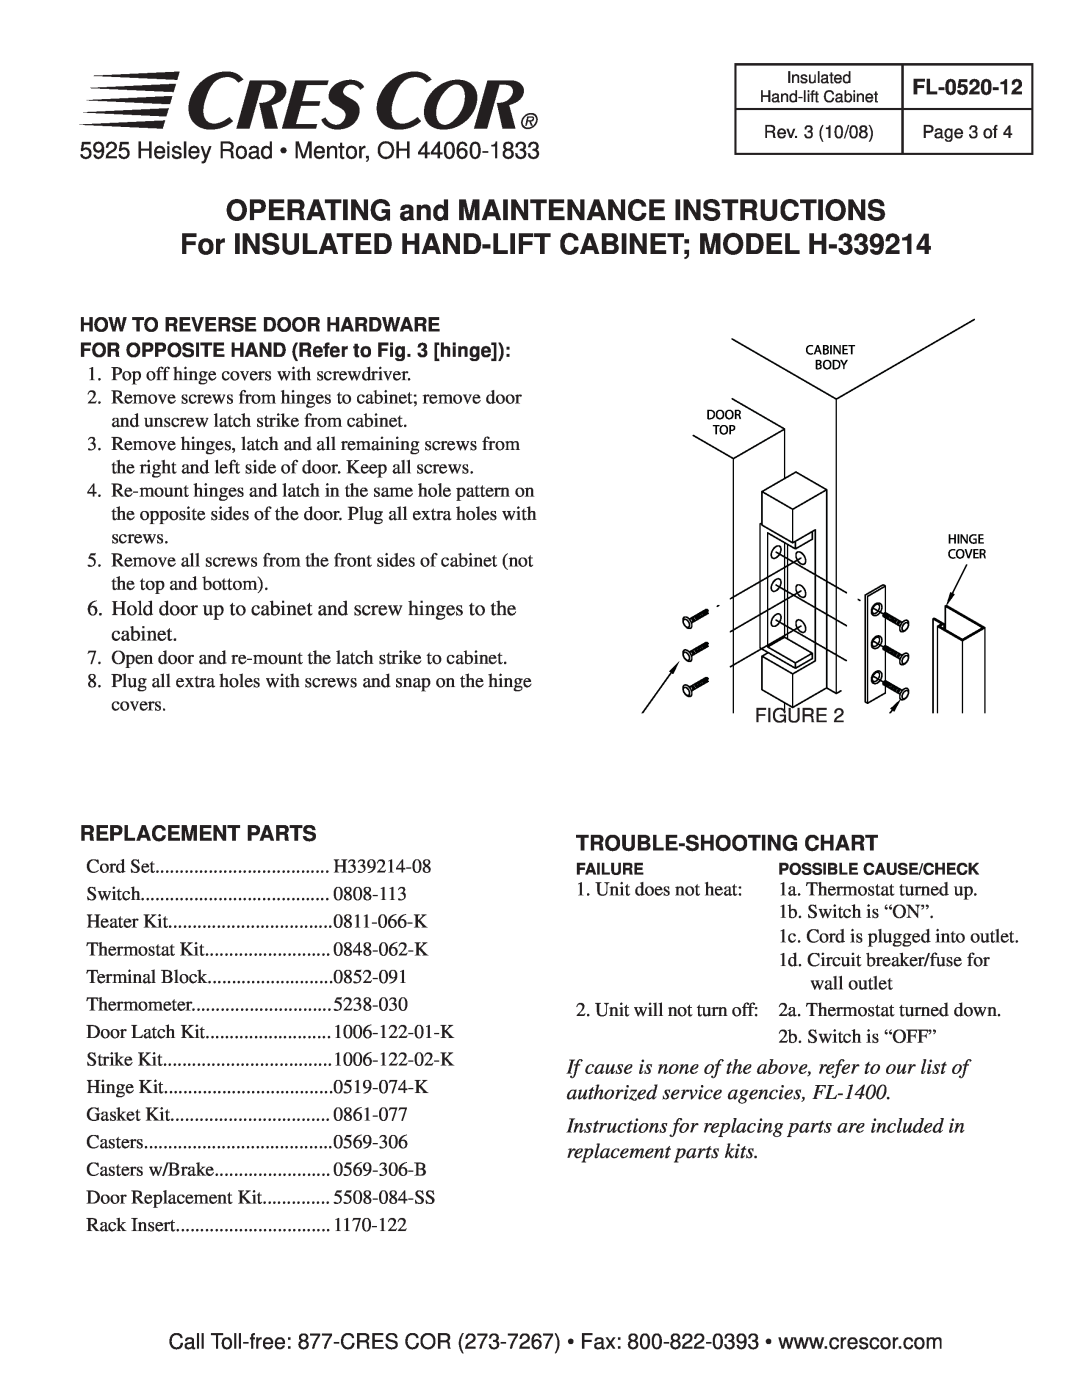 Cres Cor H-339214 Replacement Parts, Trouble-Shooting Chart, OPERATING and MAINTENANCE INSTRUCTIONS, FL-0520-12 